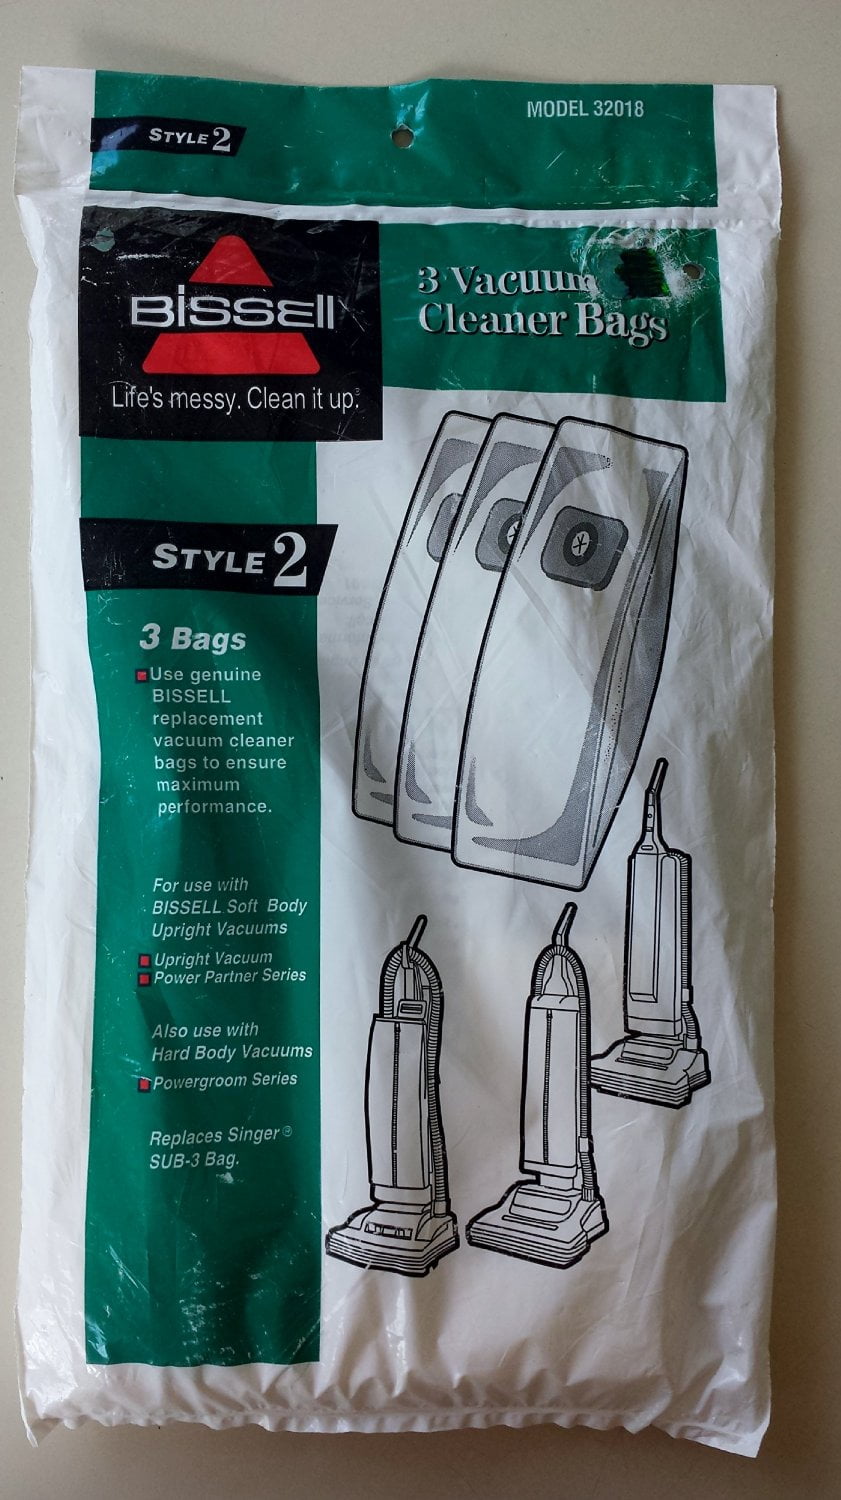 Why need to replace vacuum cleaner bags frequently ?